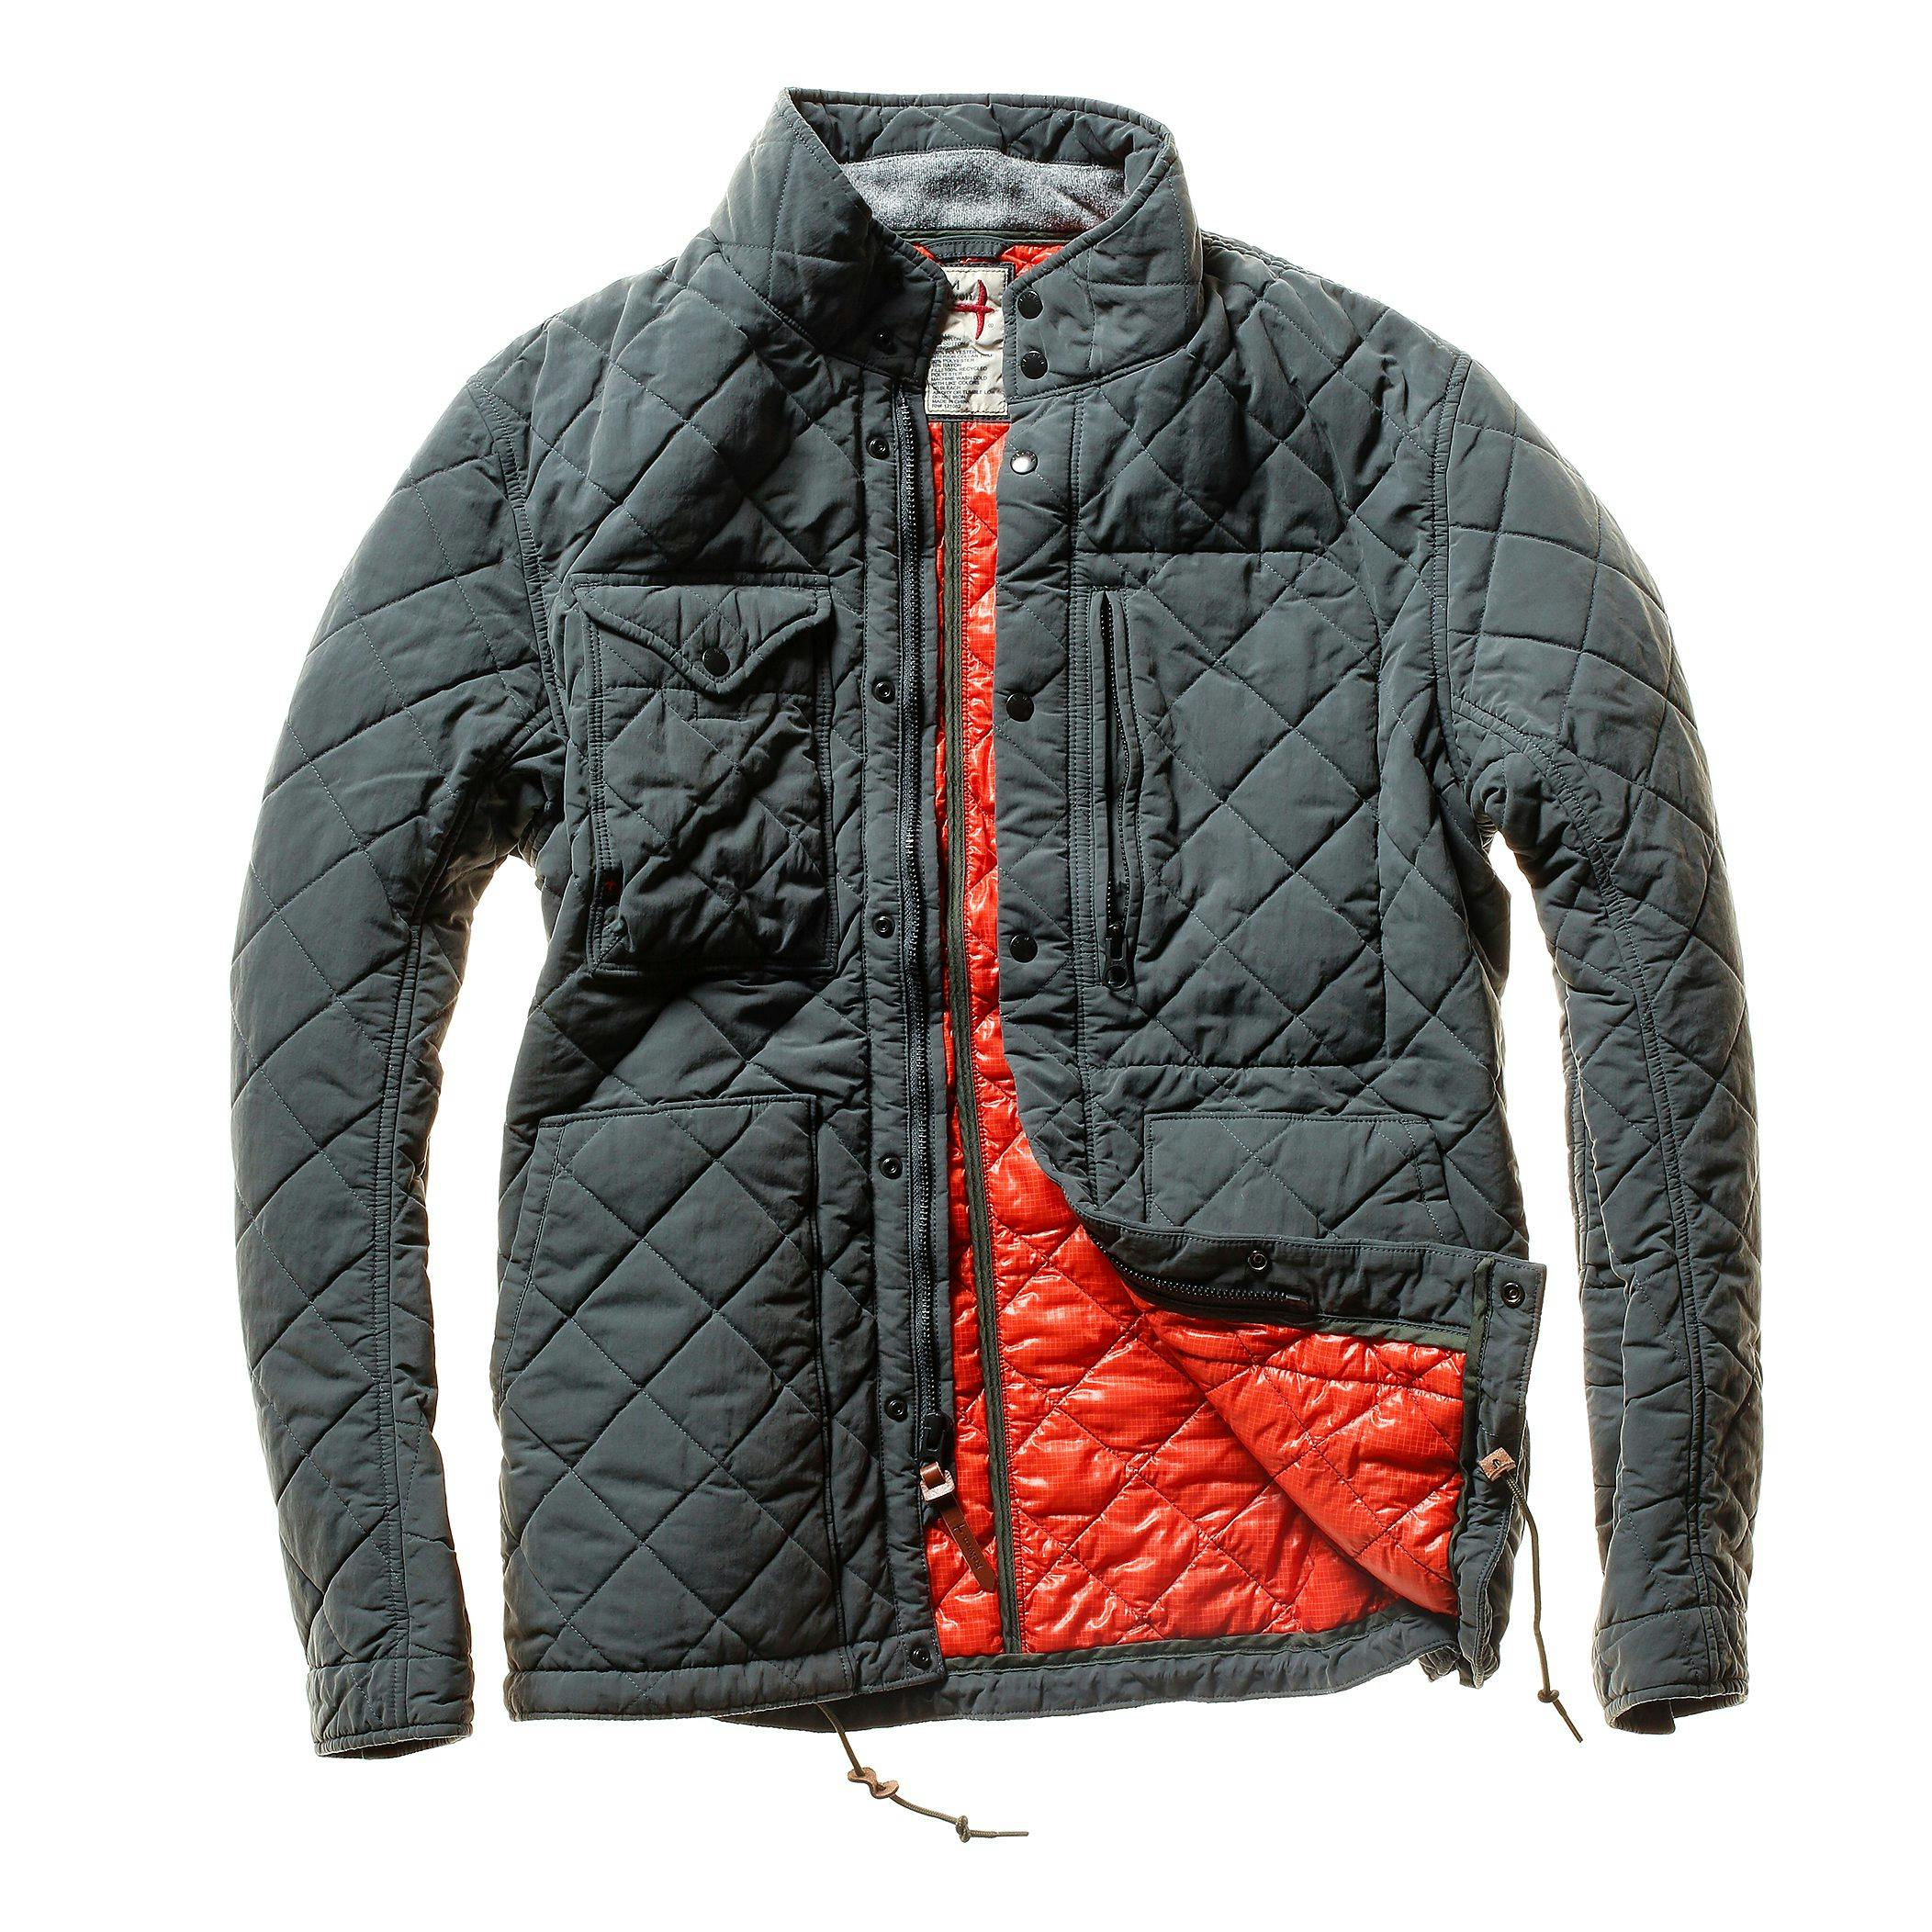 https://huckberry.imgix.net/spree/products/716804/original/80902_Relwen_Quilted_Insulated_Tanker_Jacket_Steel_Gray_01_.jpg?auto=format%2C%20compress&crop=top&fit=fill&cs=tinysrgb&ar=4%3A5&fill=solid&fill-color=FFFFFF&ixlib=react-9.8.1